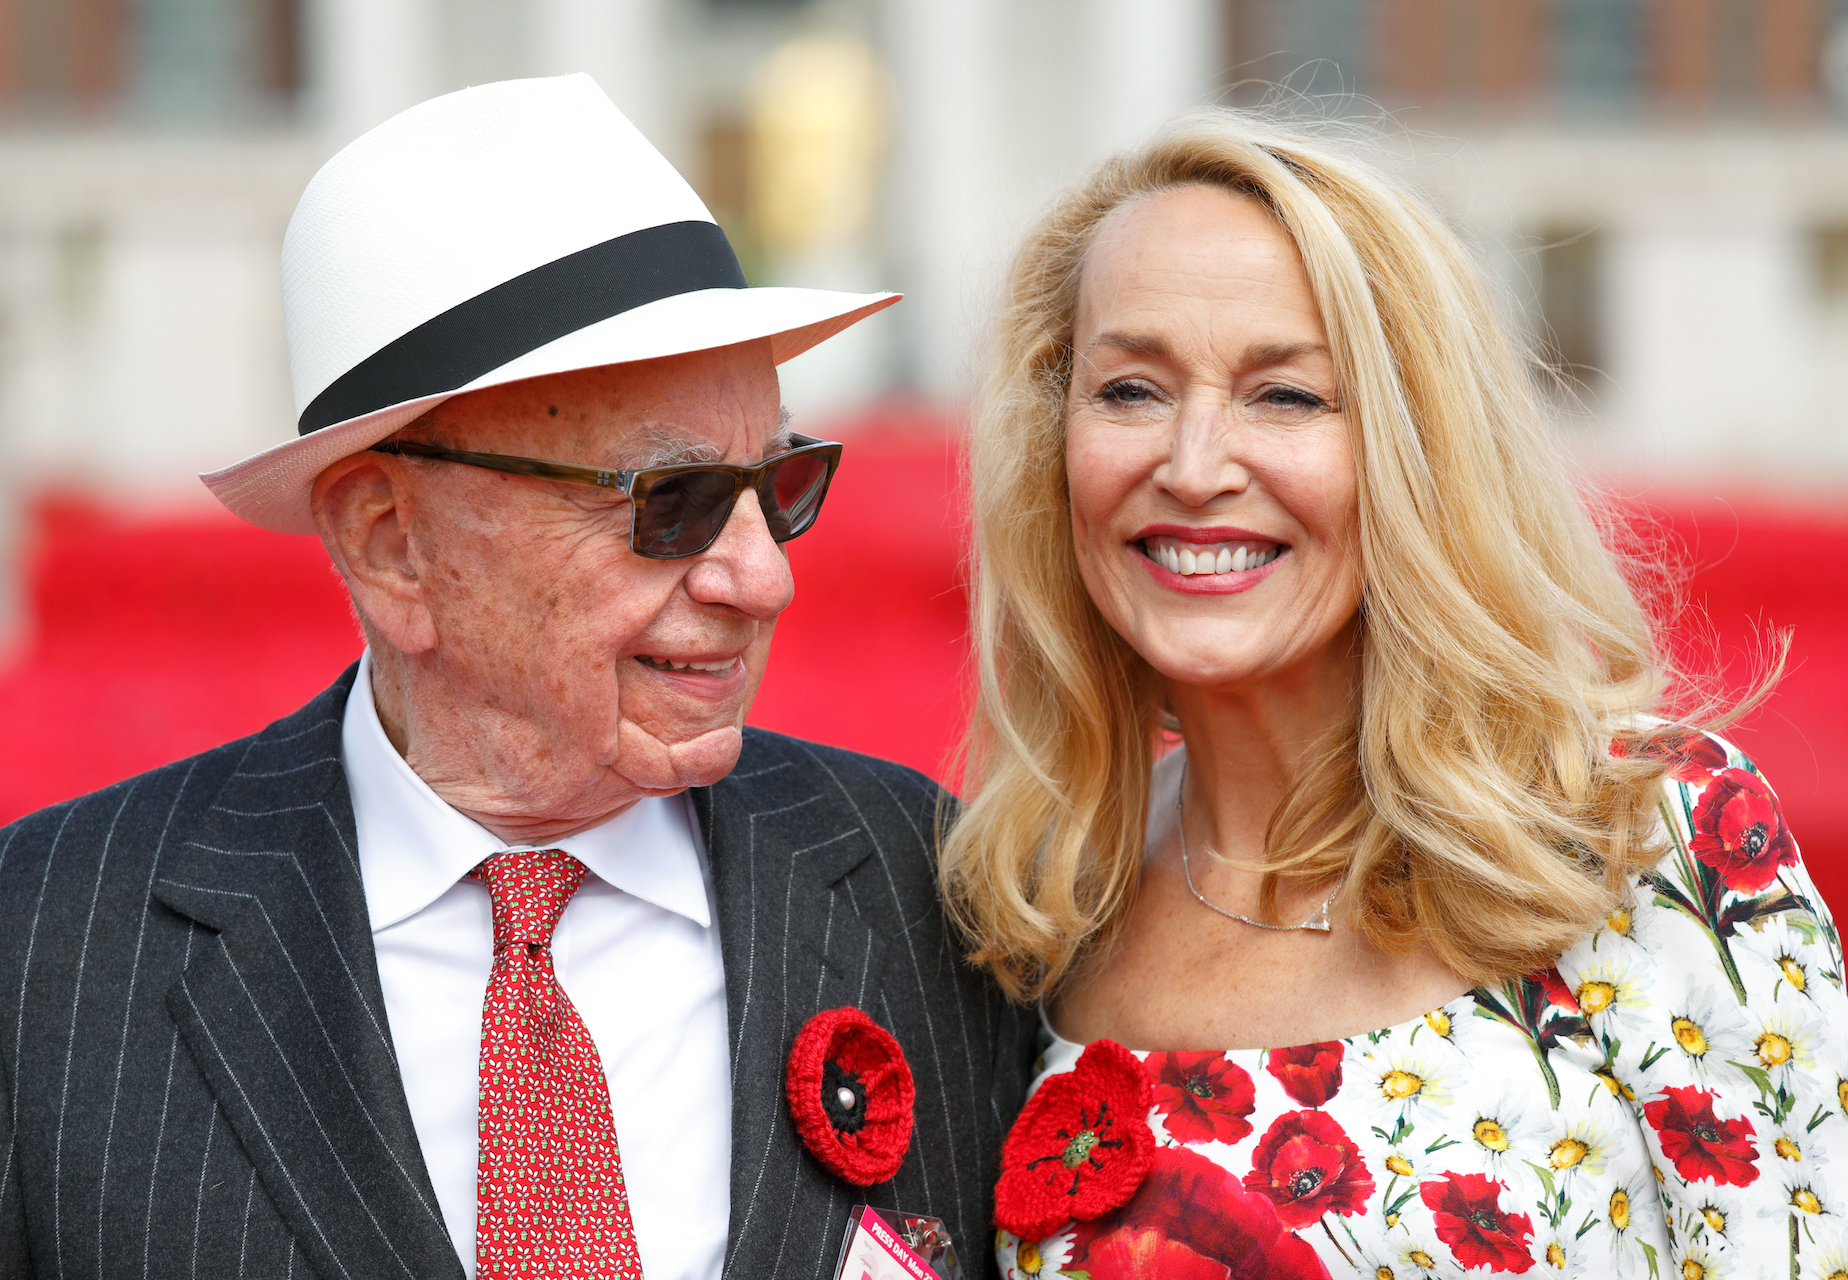 Rupert Murdoch and Jerry Hall smiling together at an event in 2016